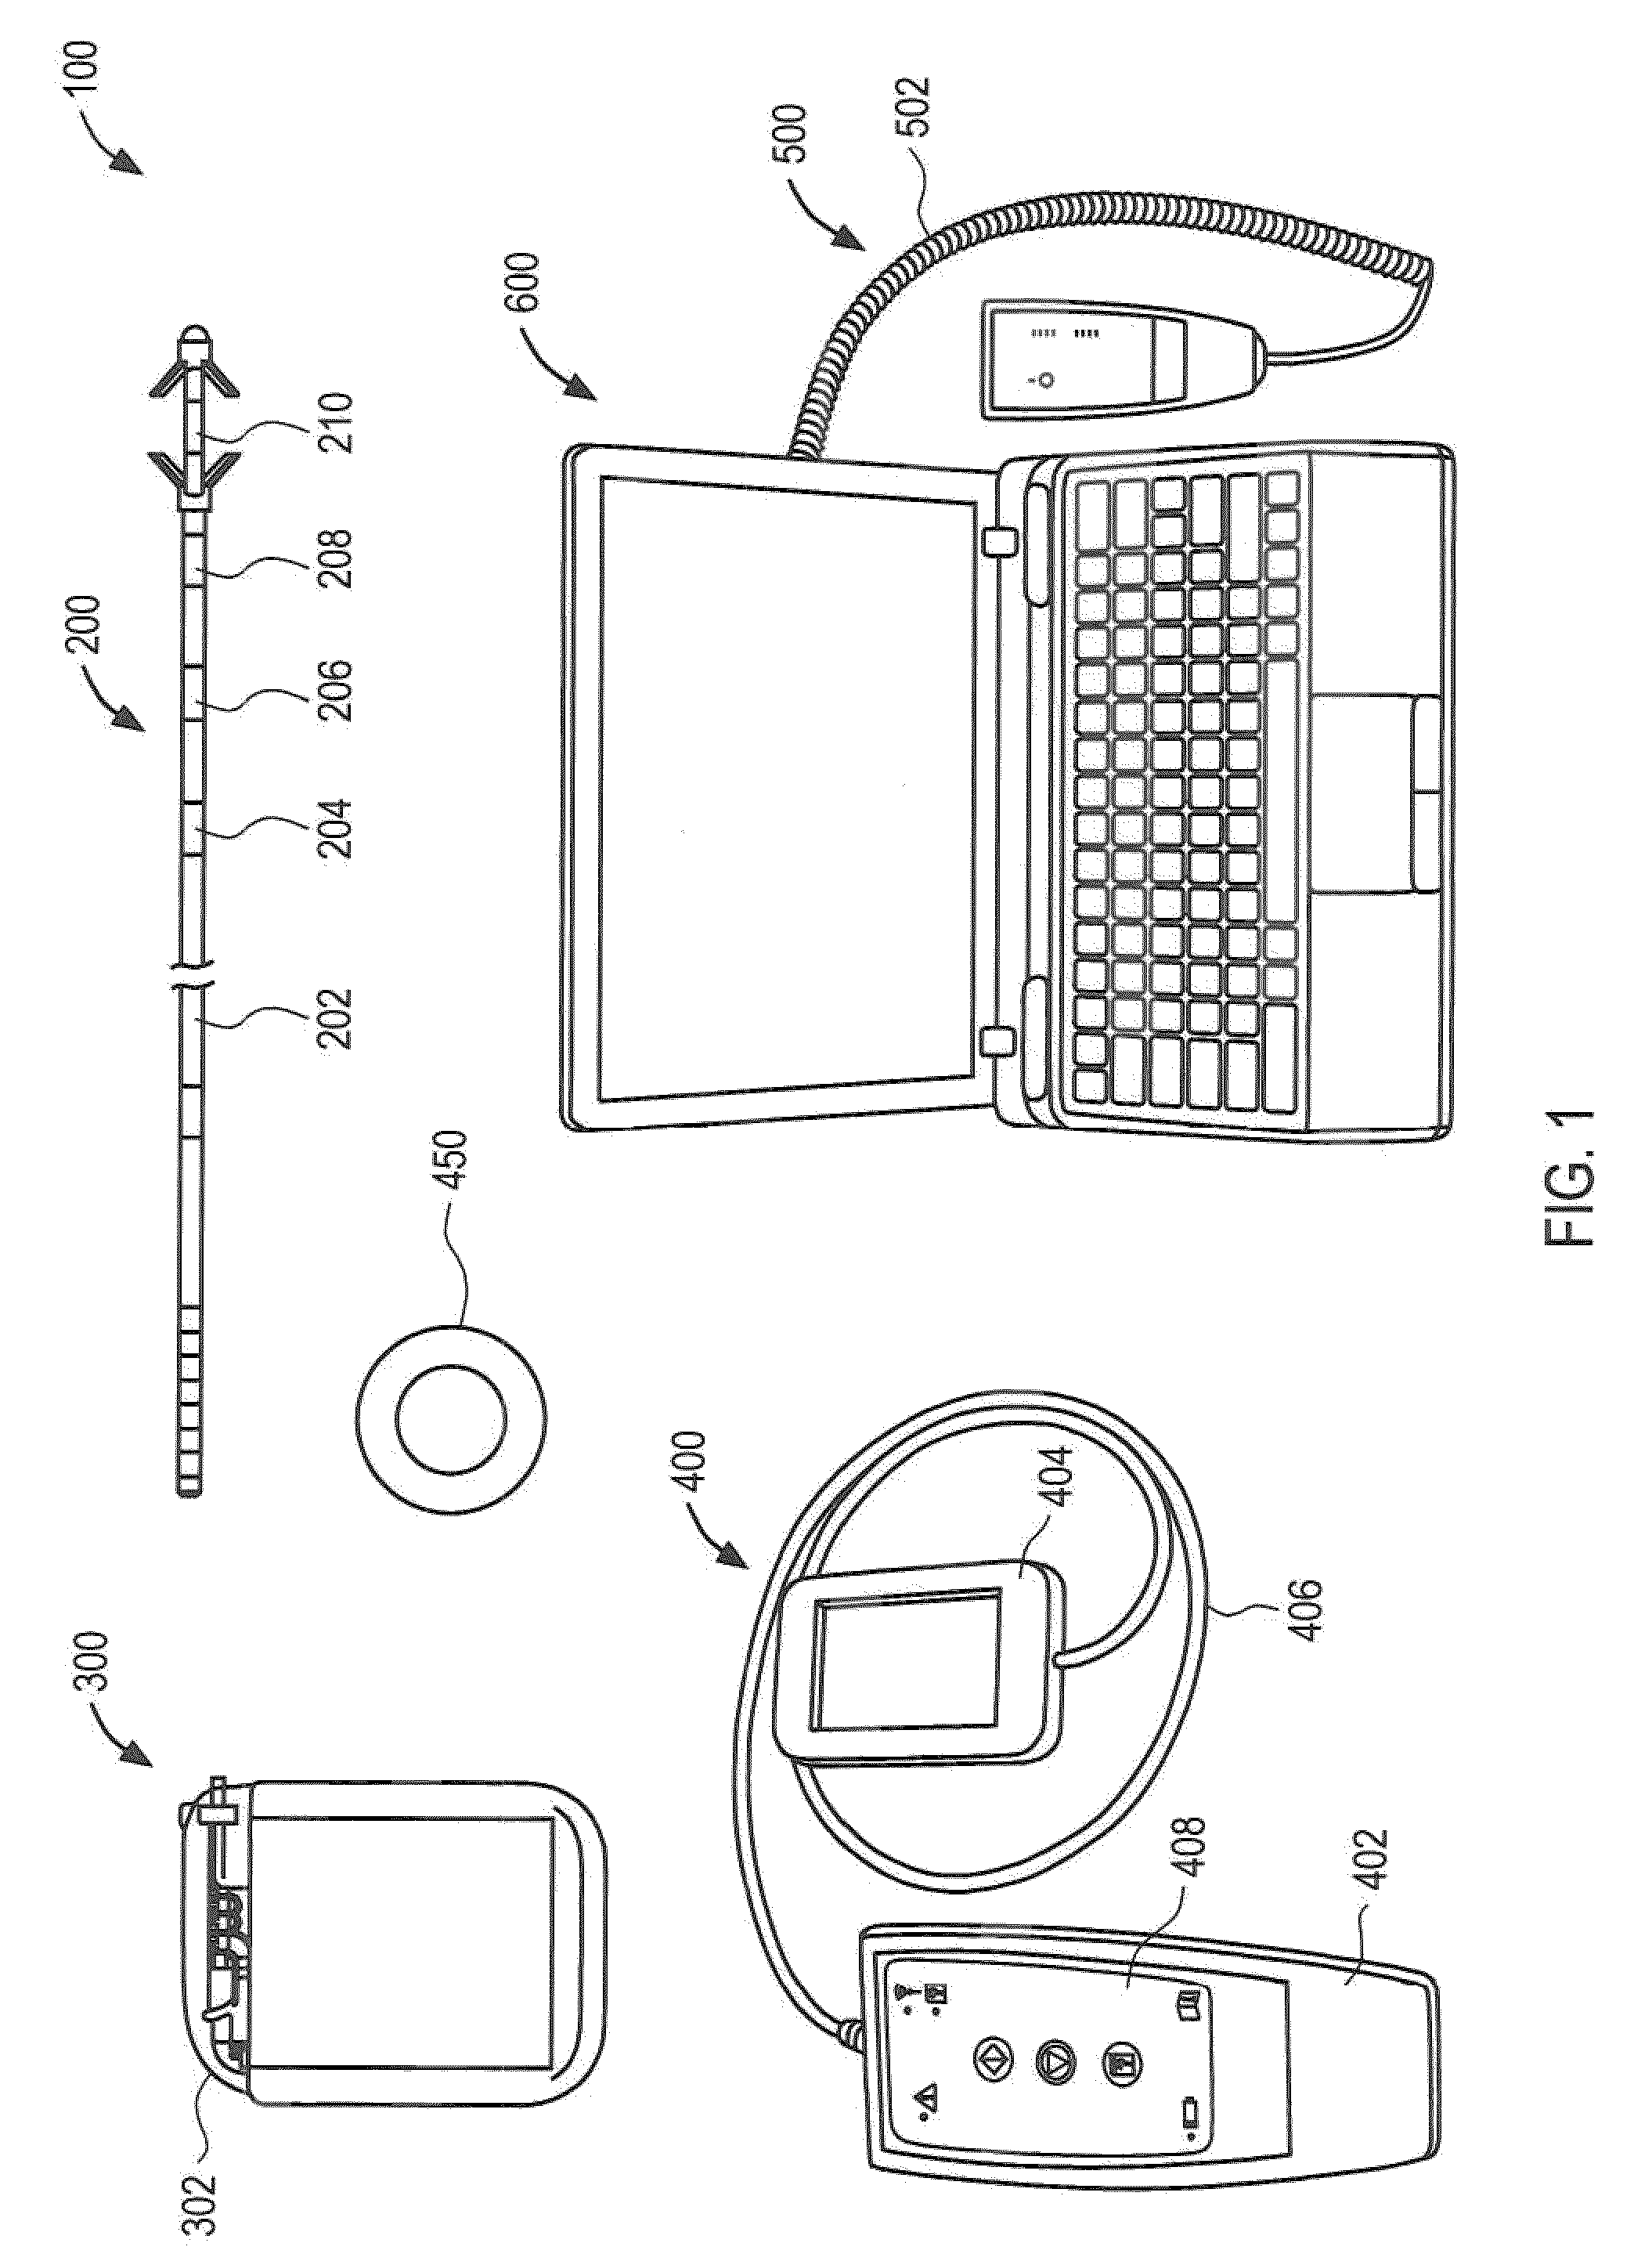 Systems and methods for restoring muscle function to the lumbar spine and kits for implanting the same